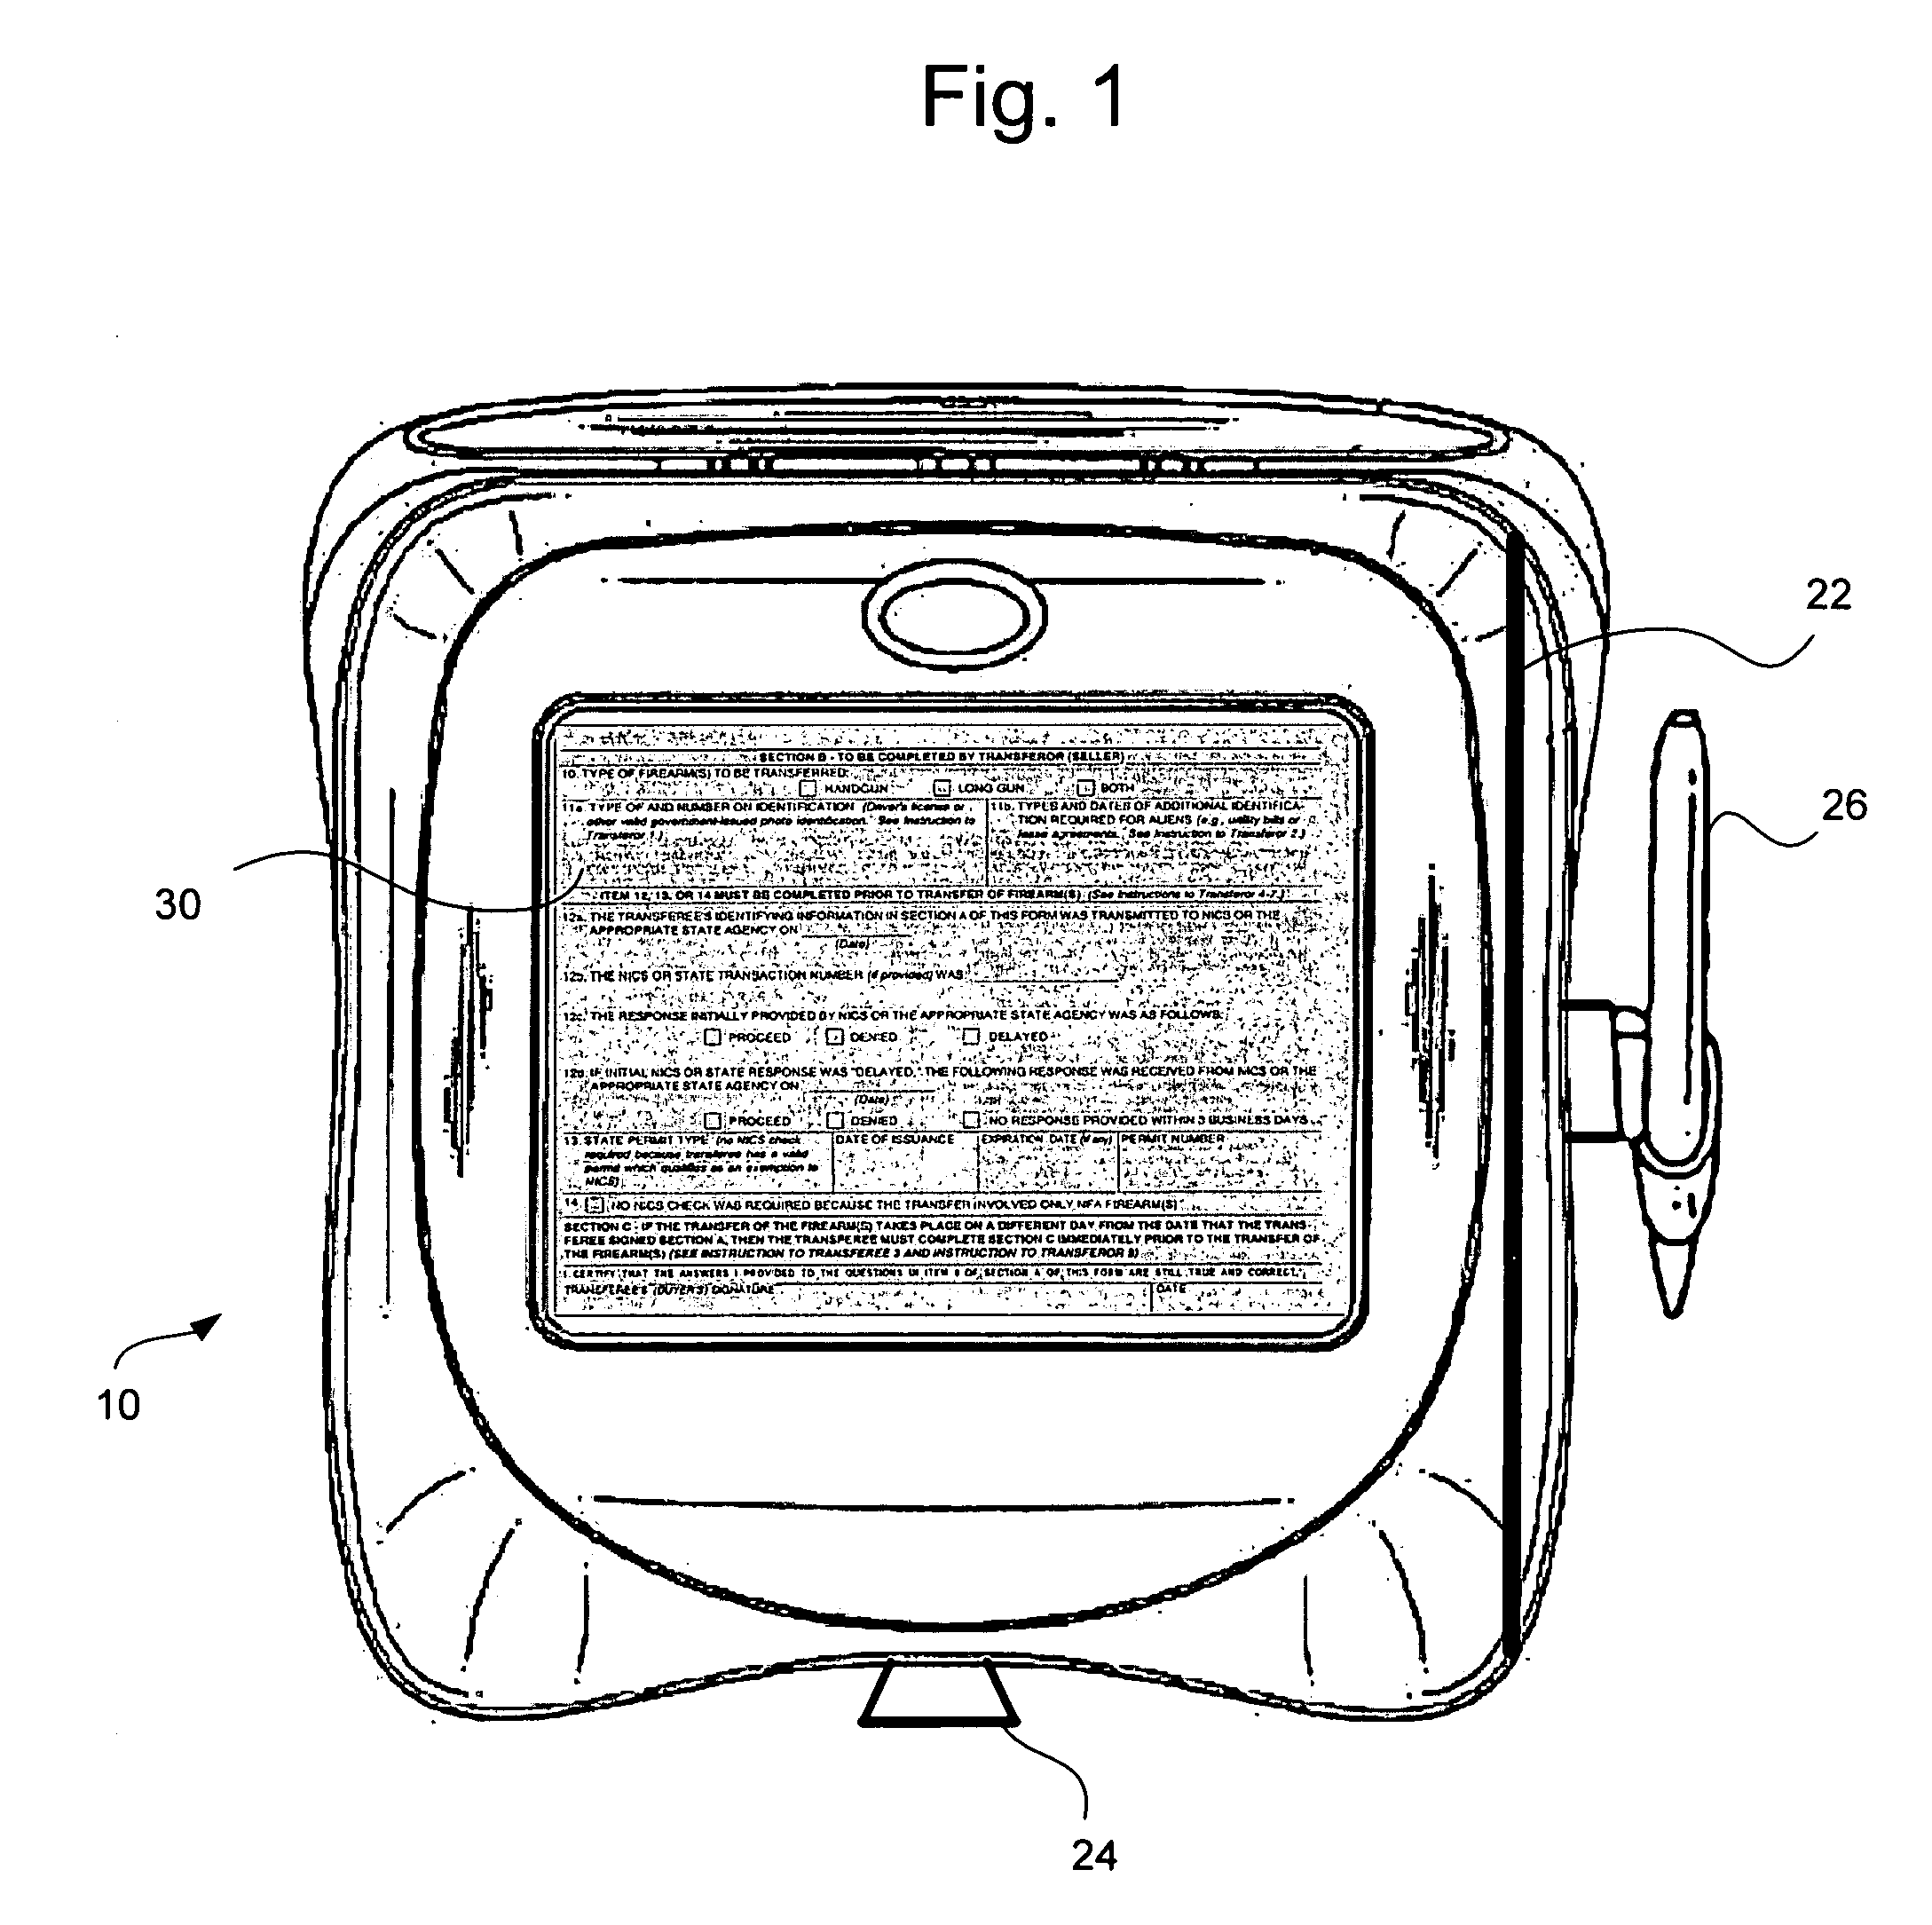 Method of operating a terminal